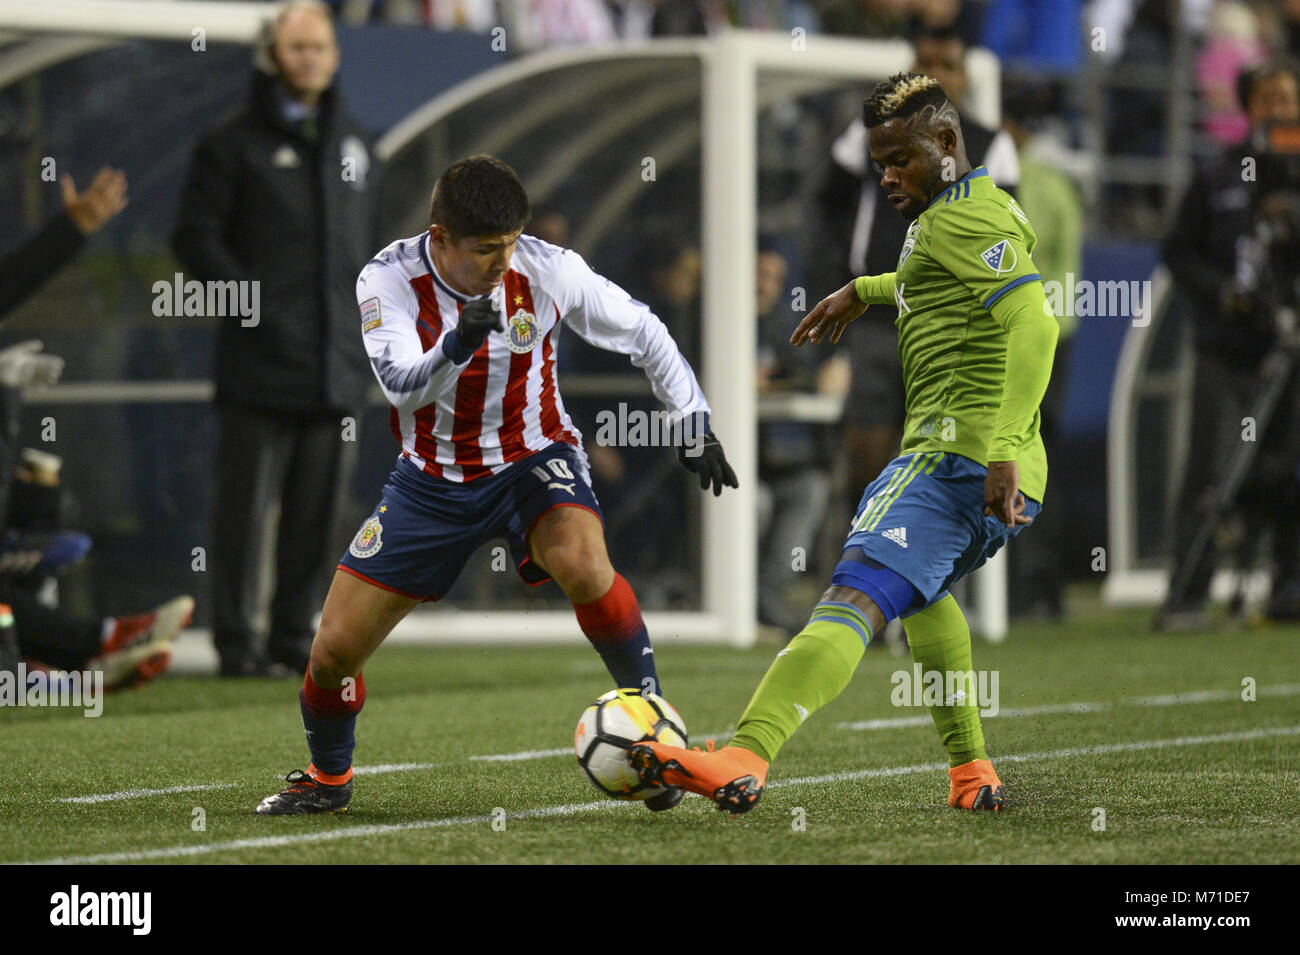 Seattle, Washington, USA. 7th Mar, 2018. CONCACAF Soccer 2018: WAYLON FRANCIS (90) defends against EDUARDO LOPEZ (10) as Chivas Guadalajara visits the Seattle Sounders in a CONCACAF quarterfinal match at Century Link Field in Seattle, WA. Seattle won the match 1-0. Credit: Jeff Halstead/ZUMA Wire/Alamy Live News Stock Photo